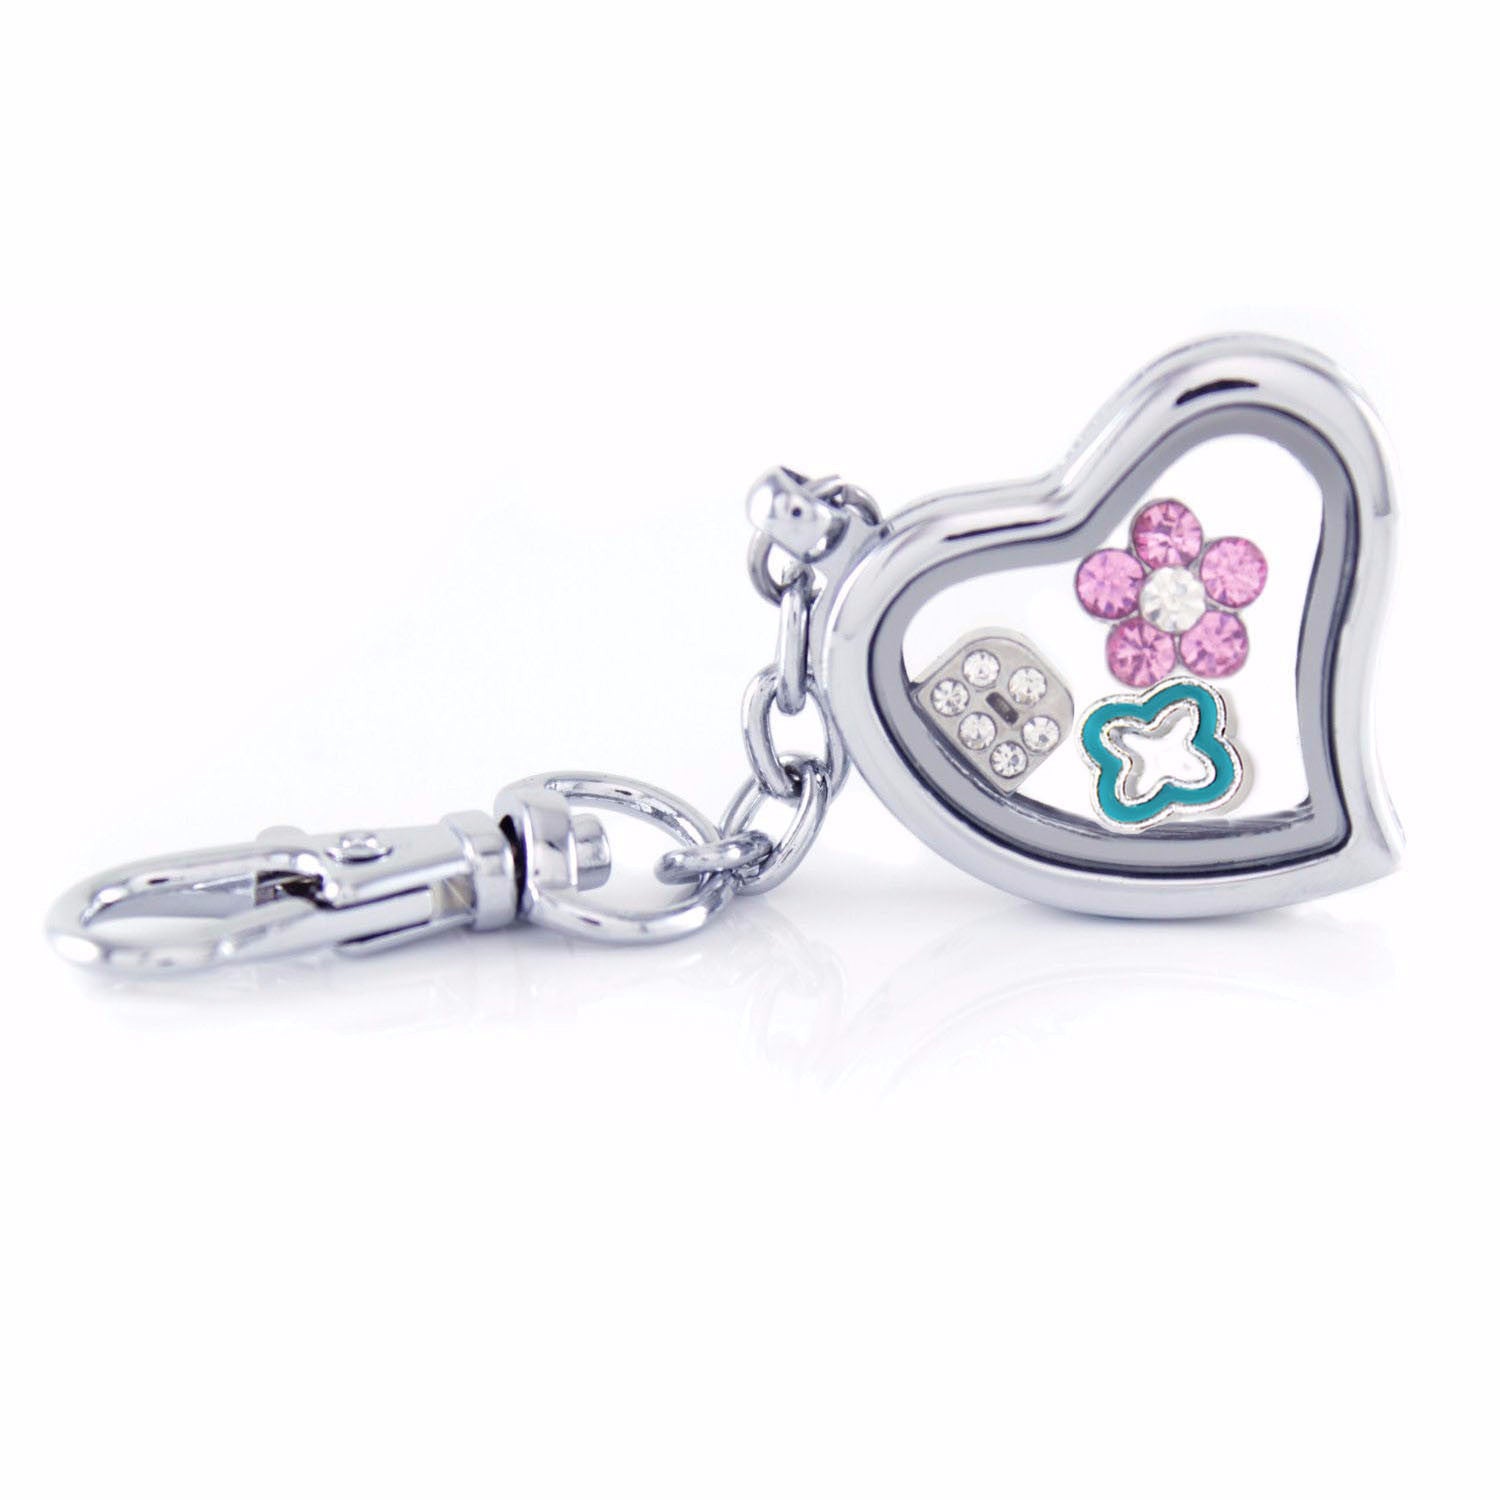 Silver Heart Floating Locket Keychain Includes 4 Charm Choices By BG247®